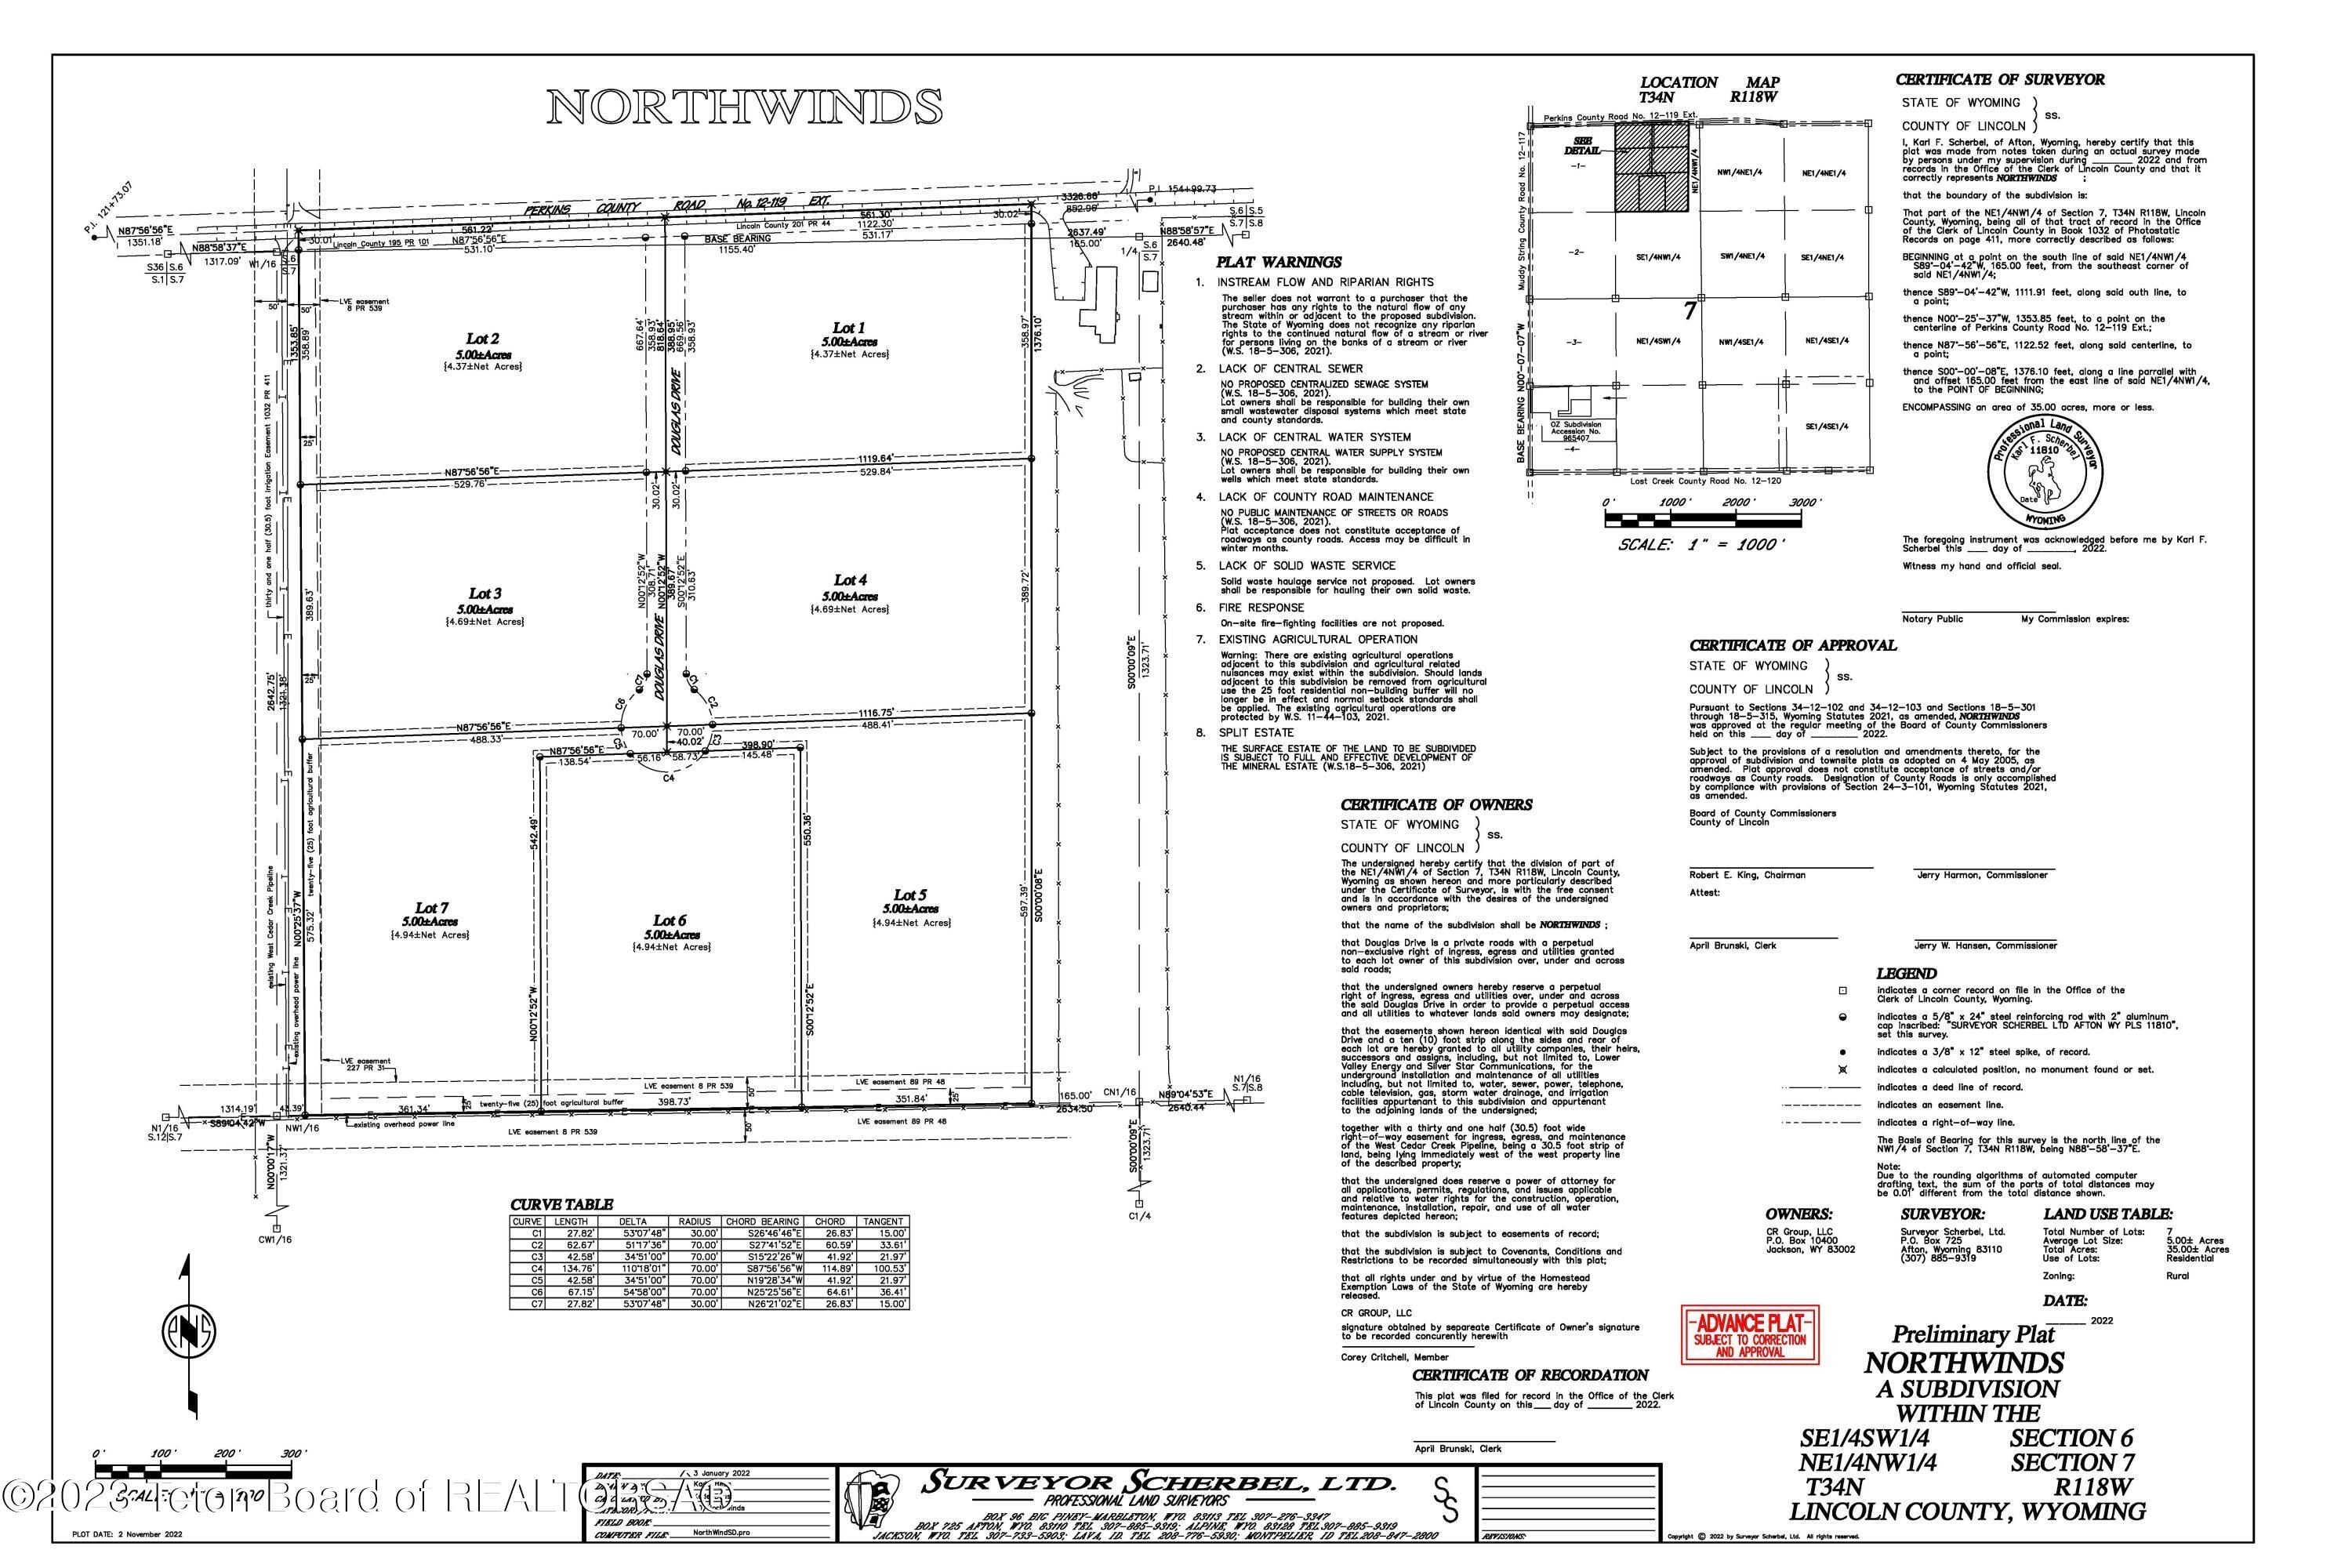 2. Lot 1 Of Northwinds Subdivision